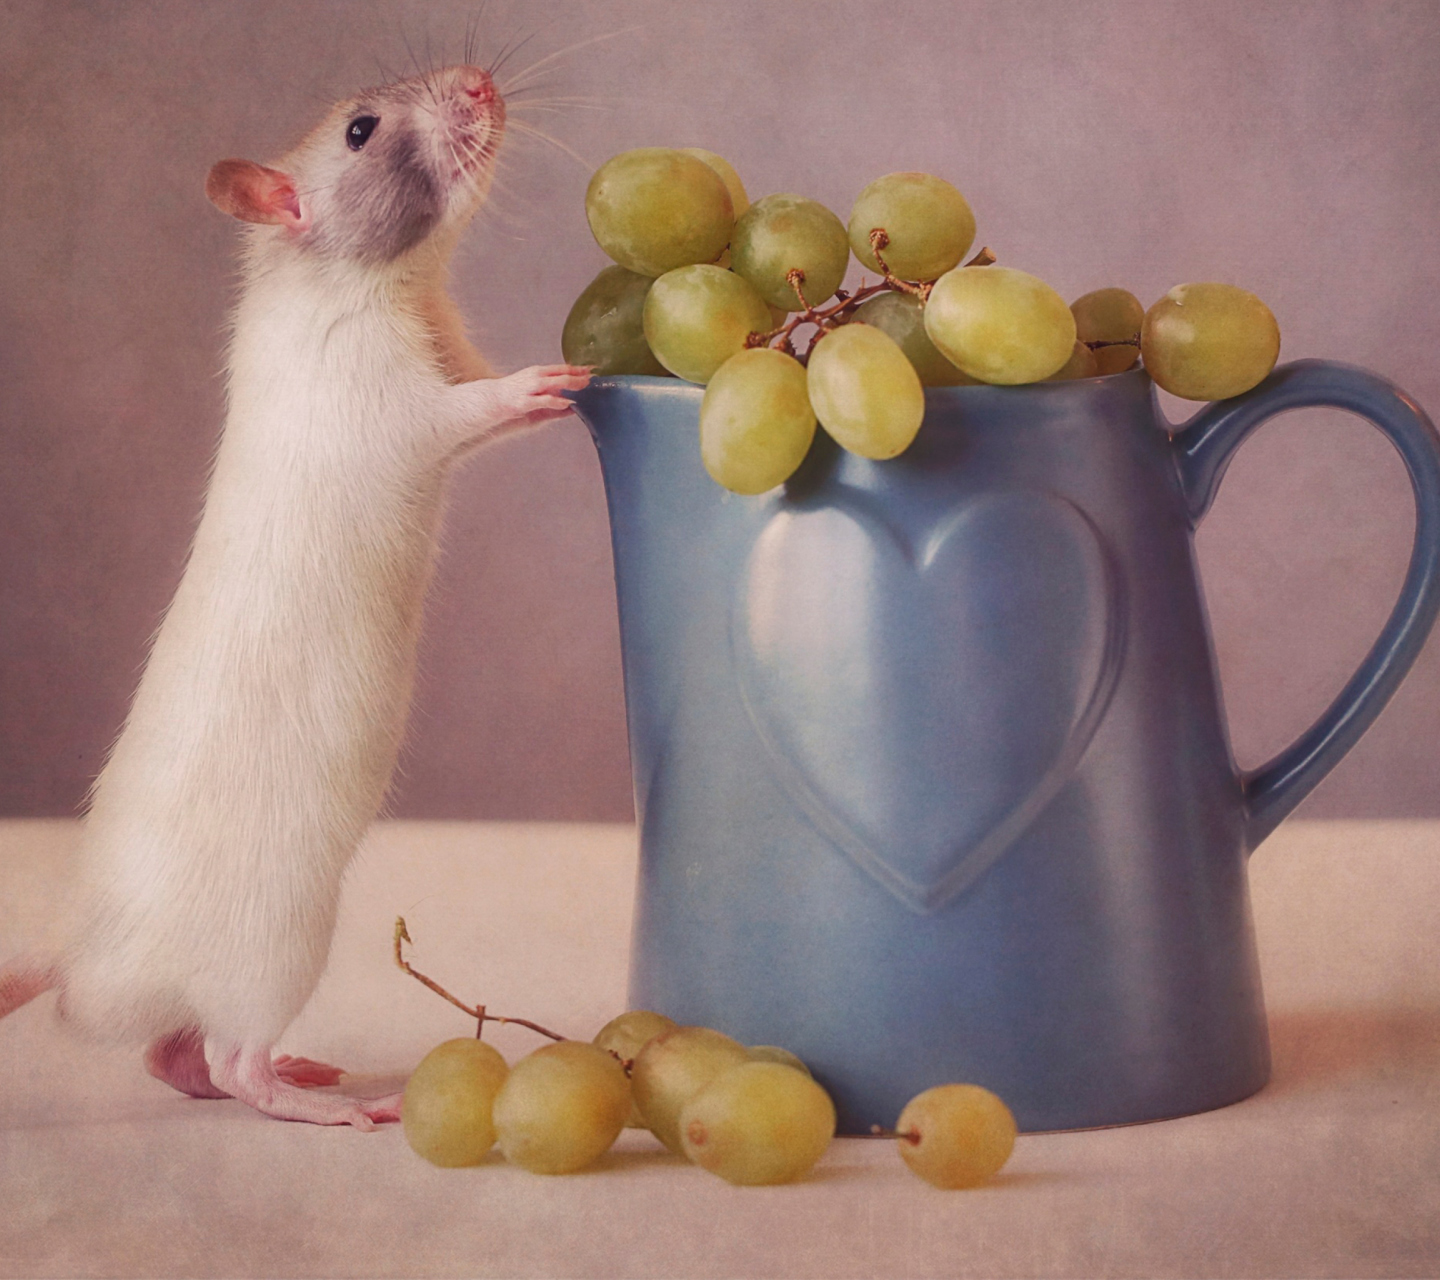 Mouse Loves Grapes screenshot #1 1440x1280